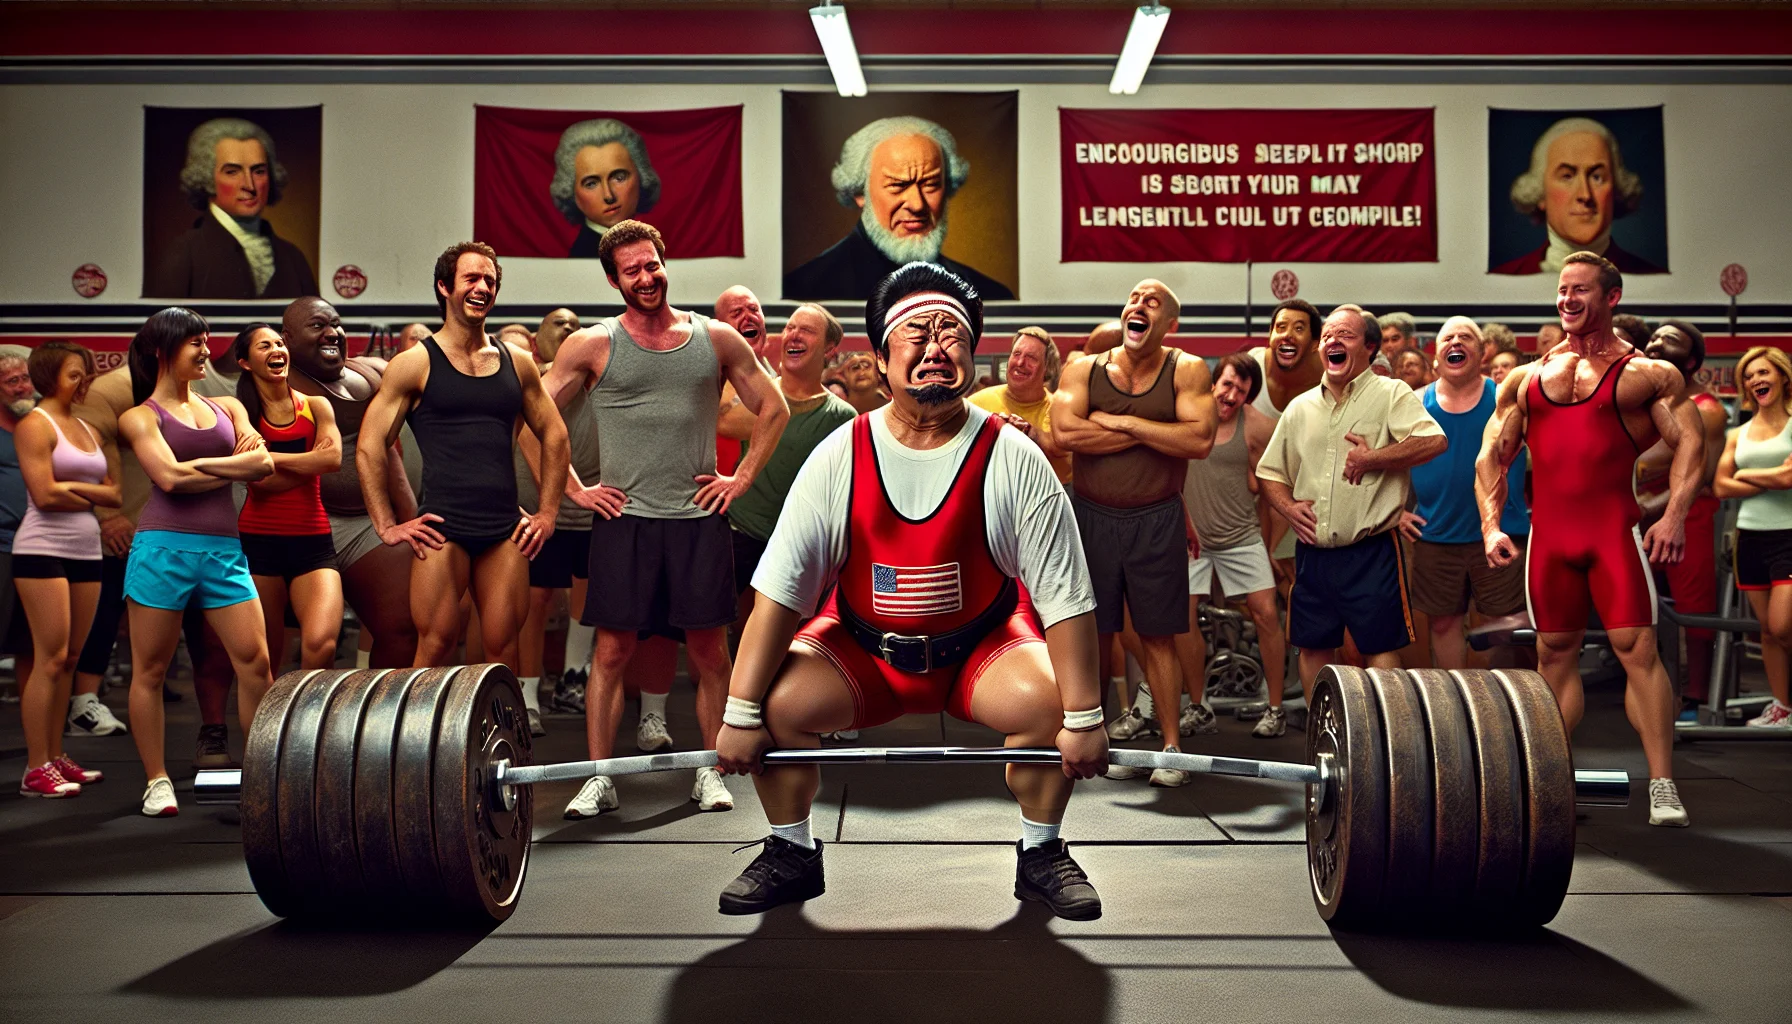 An amusing image of a powerlifting scenario in a typical American gym. In the spotlight, a middle-aged South-Asian man wearing a red powerlifting suit, grapples with a massive barbell laden with equally massive weights. His facial expression shows deep concentration intermixed with mild struggle, unintentionally mimicking a renowned classical sculpture. Surrounding him, onlookers of various descents and genders look amused, some laughing while others display exaggerated expressions of surprise. Fitness equipment is scattered around the room. Encouraging banners hang from the gym walls, offering humorous phrases to inspire gym-goers towards exercise and fitness.